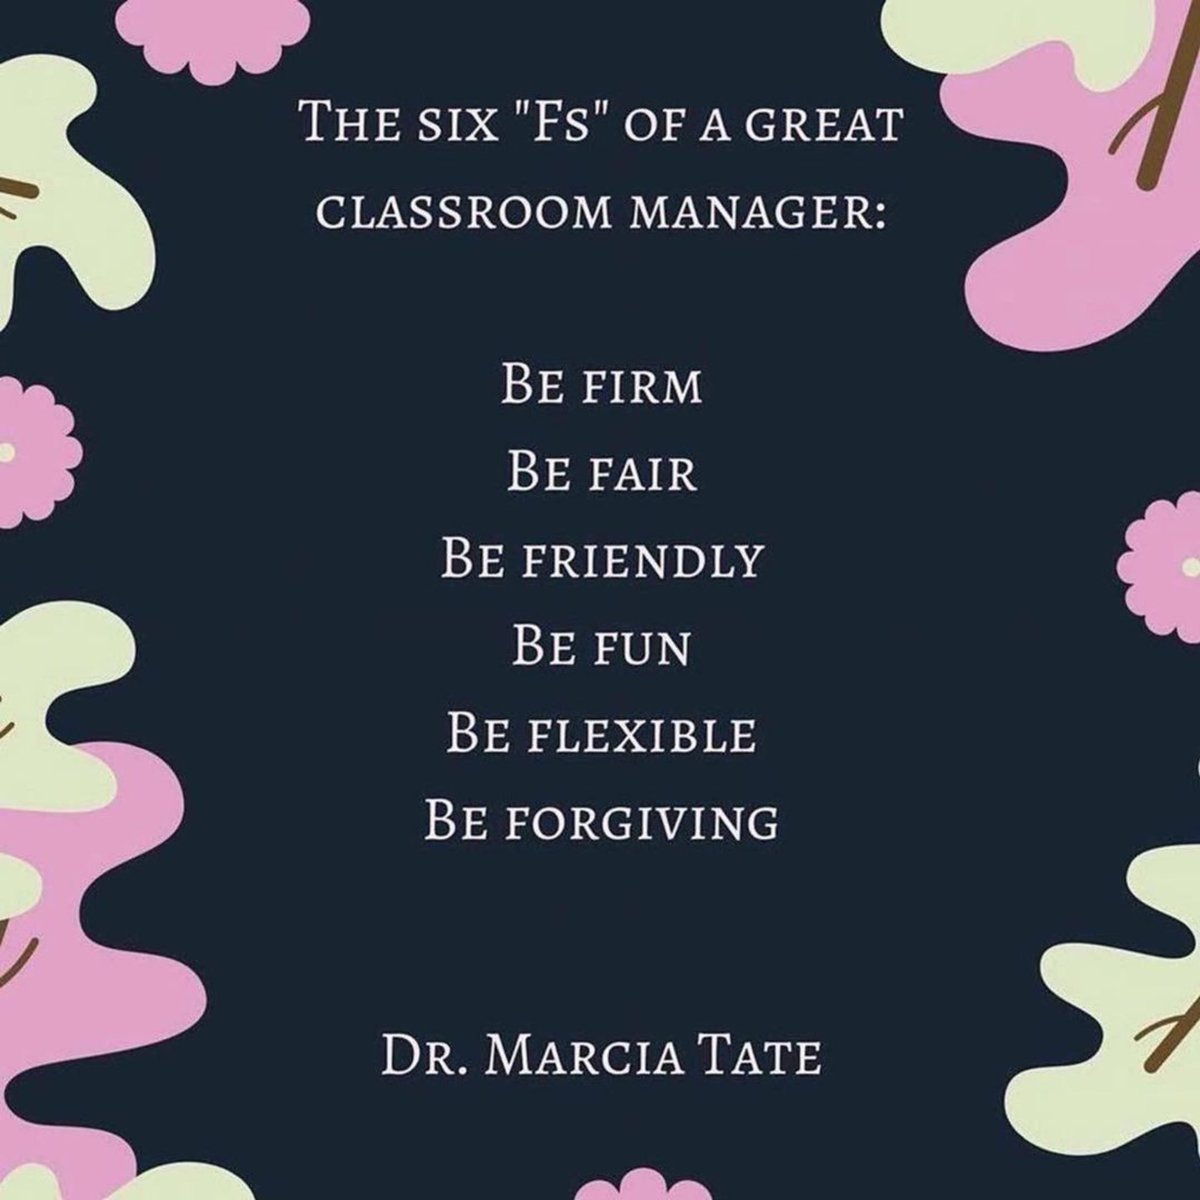 Twice a year—at the beginning of a new semester—I like to share the “the six ‘Fs’ of a great classroom manager.” Whether your first day back in the classroom was today or is next week, it’s the perfect time to remember the six “Fs”! #edchat